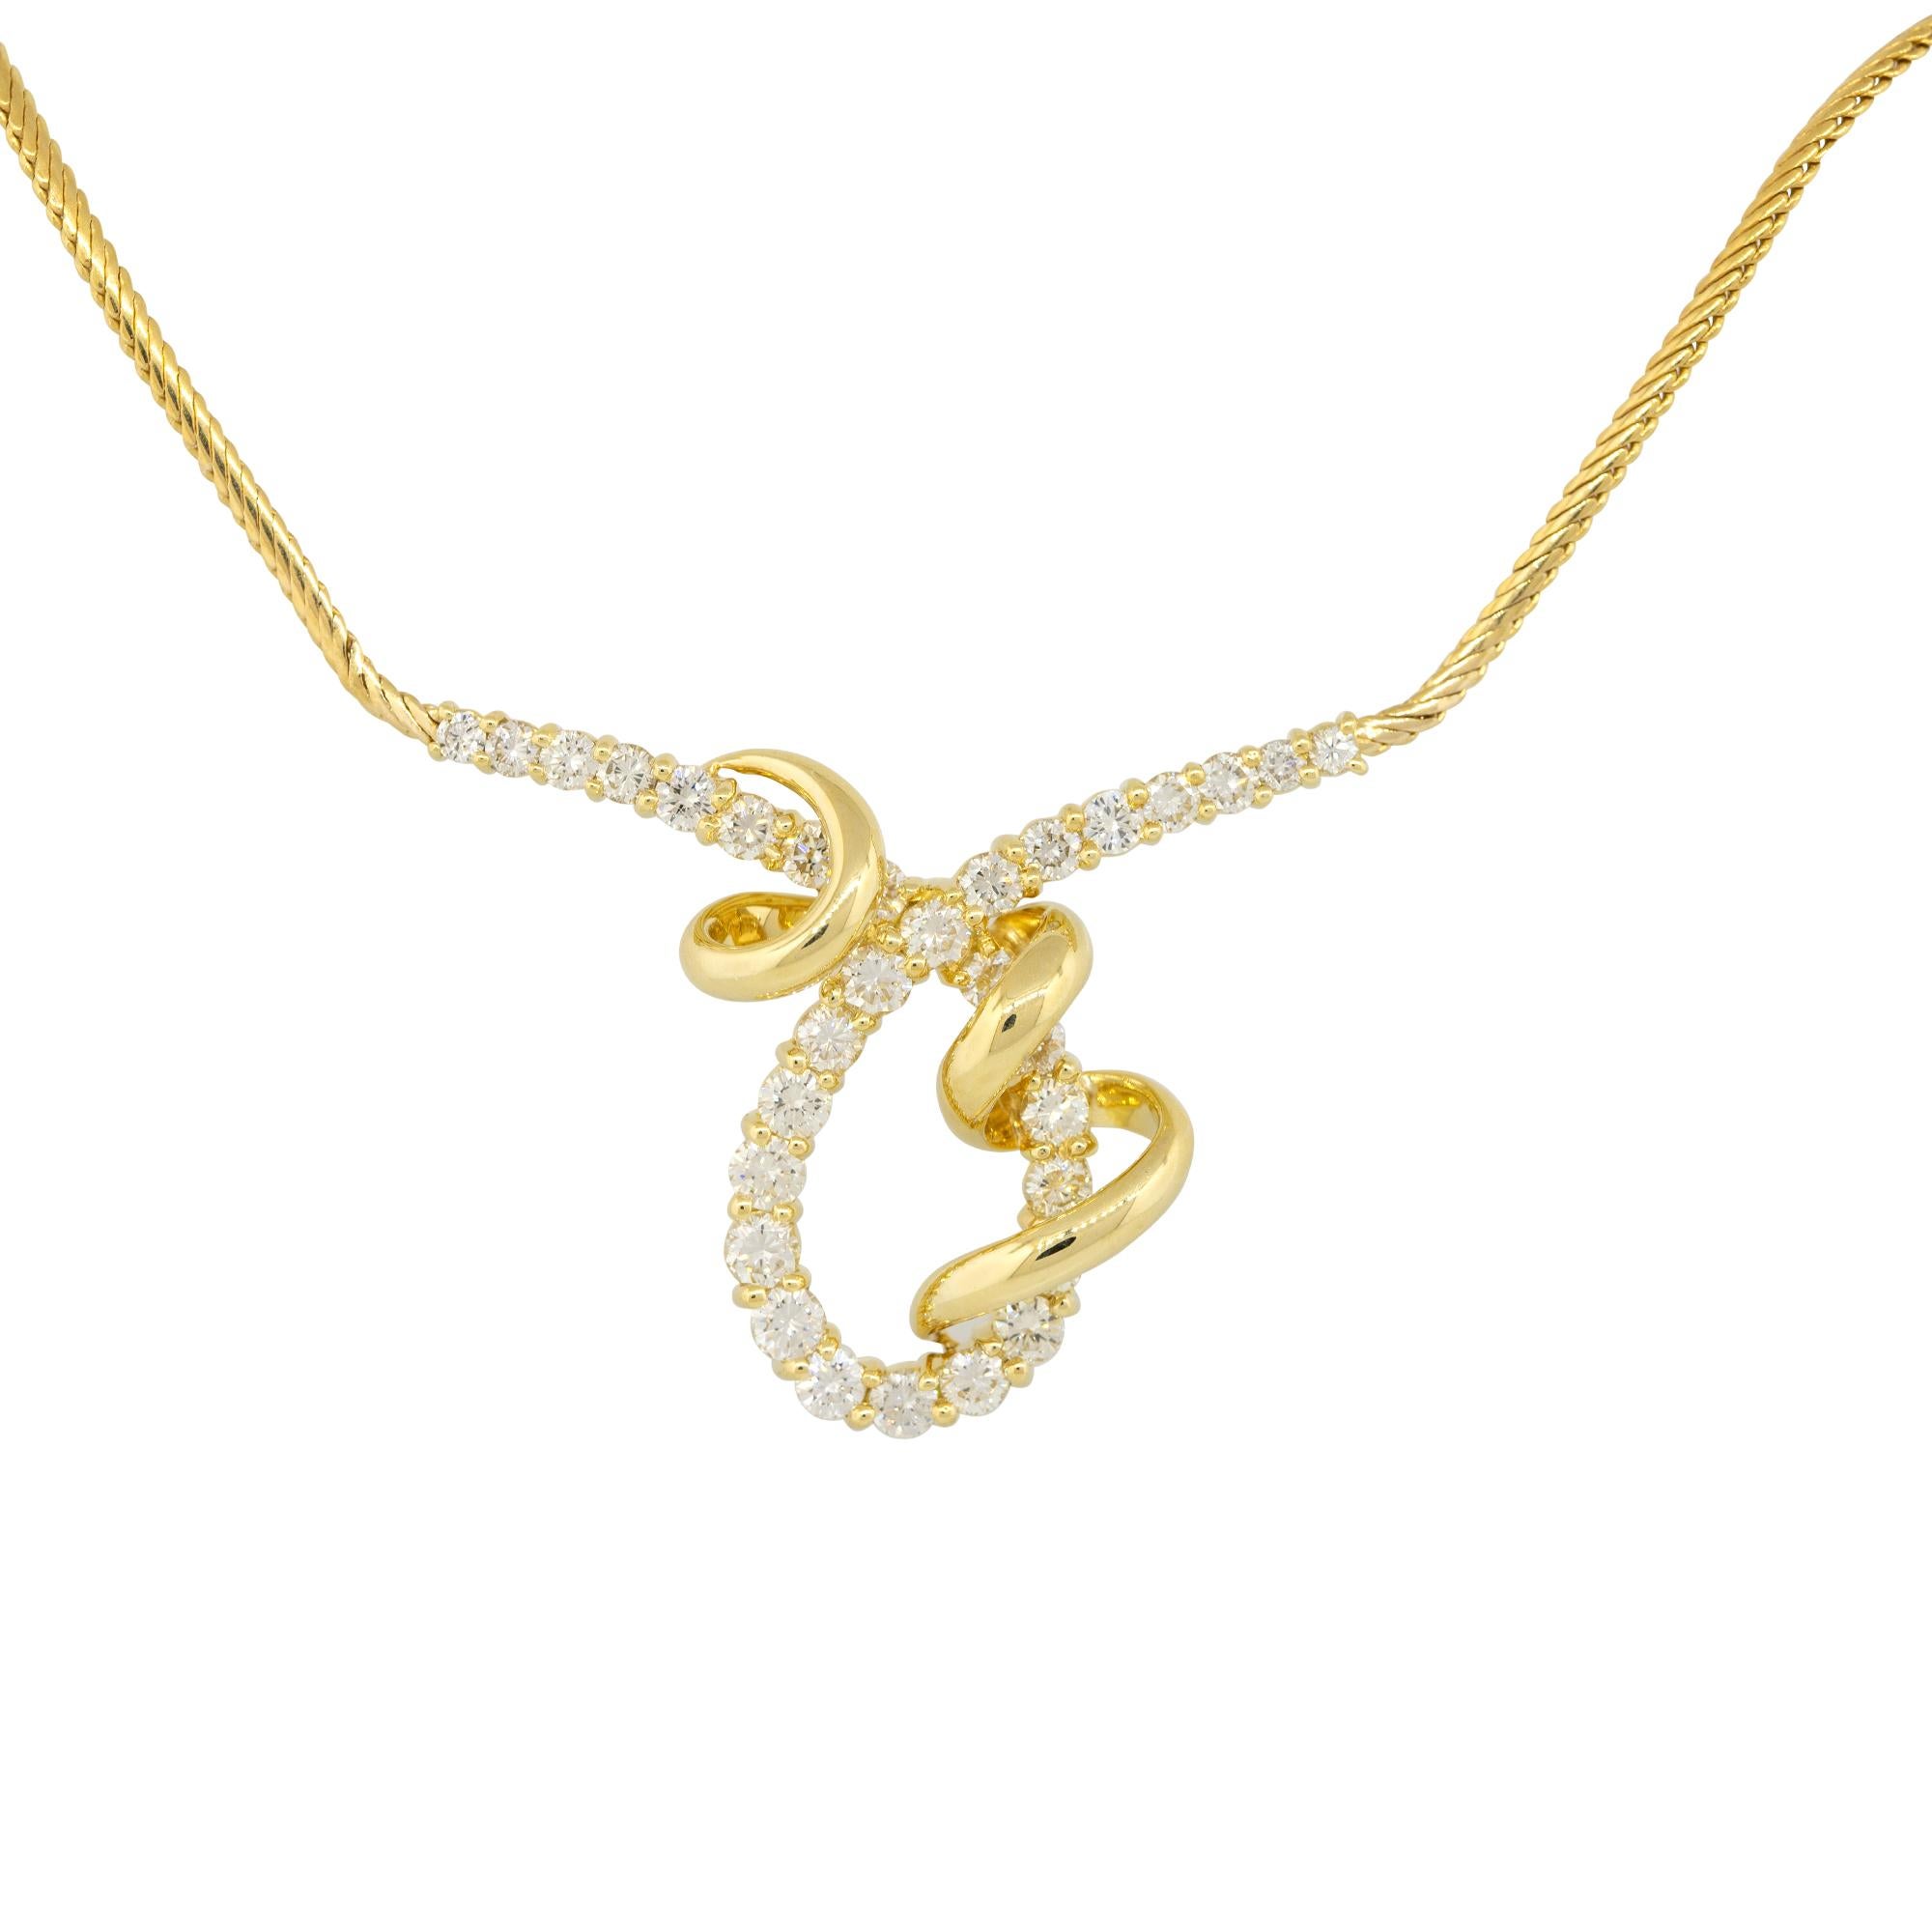 Jose Hess 18k Yellow Gold 3ct Round Brilliant Diamond Loop Ribbon Necklace

Product: Jose Hess Diamond Ribbon Necklace
Material: 18k Yellow Gold
Diamond Details: There are approximately 3 carats of Round Brilliant cut diamonds (31 stones)
Diamond